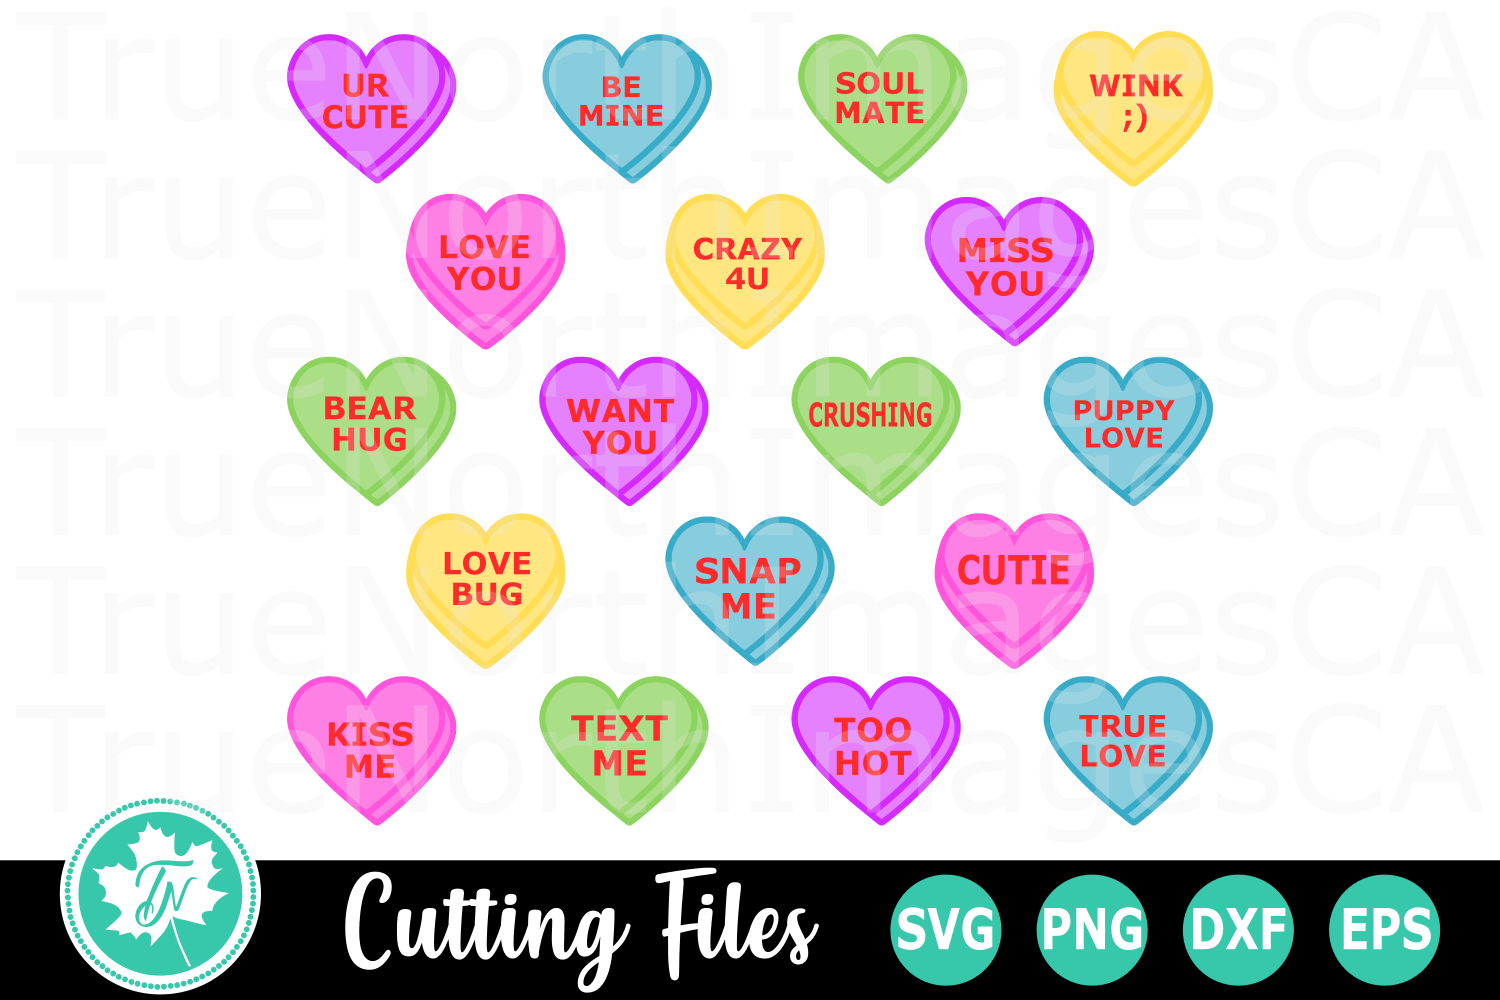 Conversation Hearts Printable - Printable Word Searches